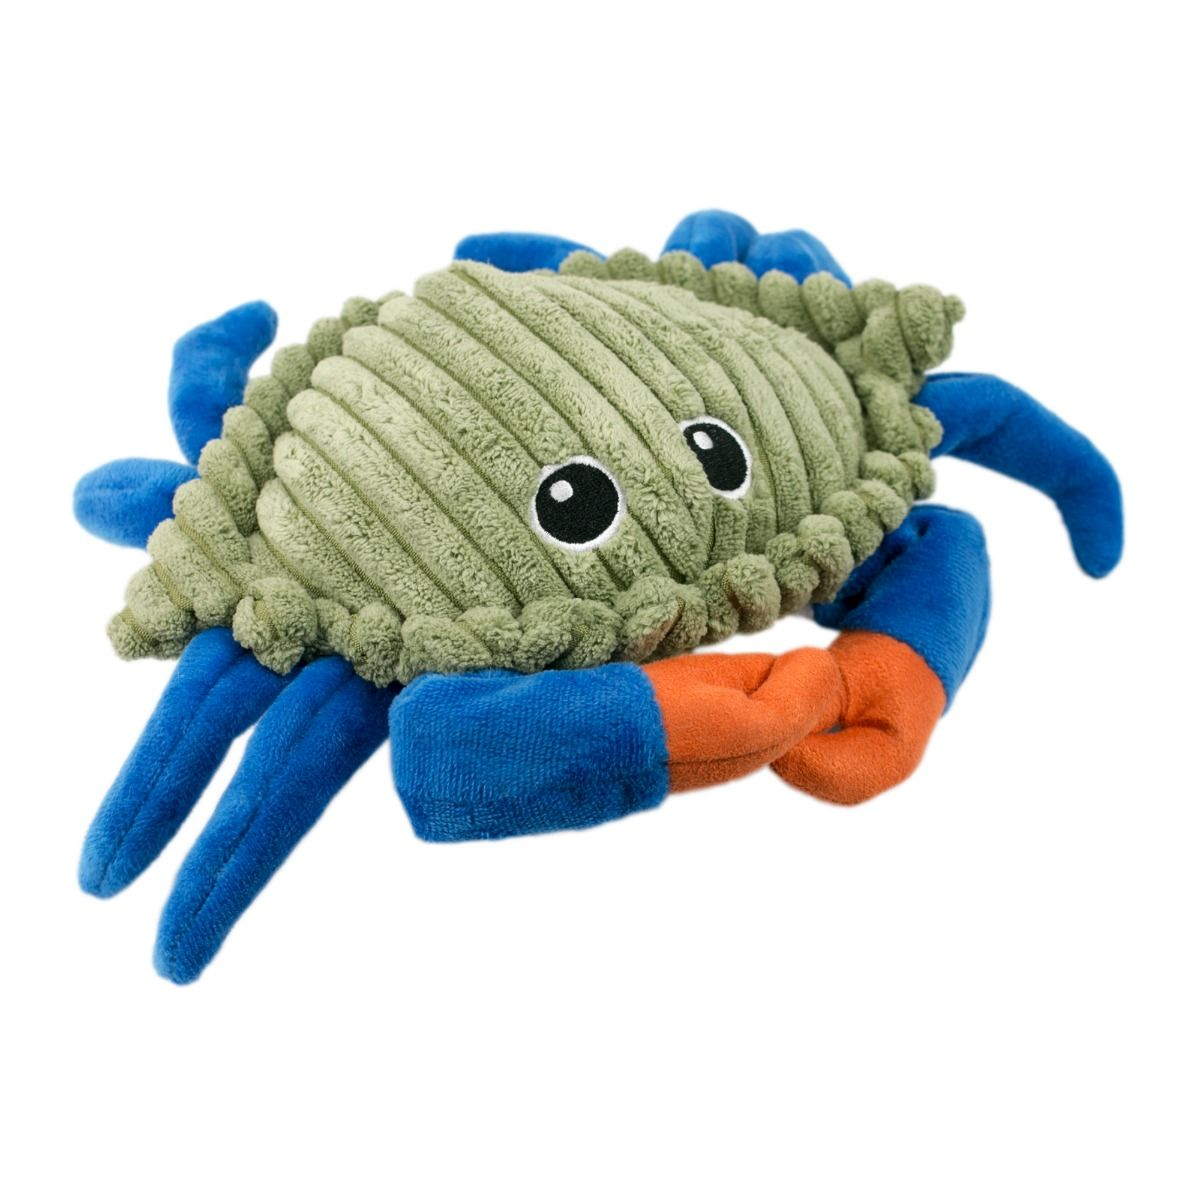 Plush Crab Animated Dog Toy - 9-in - Mellow Monkey